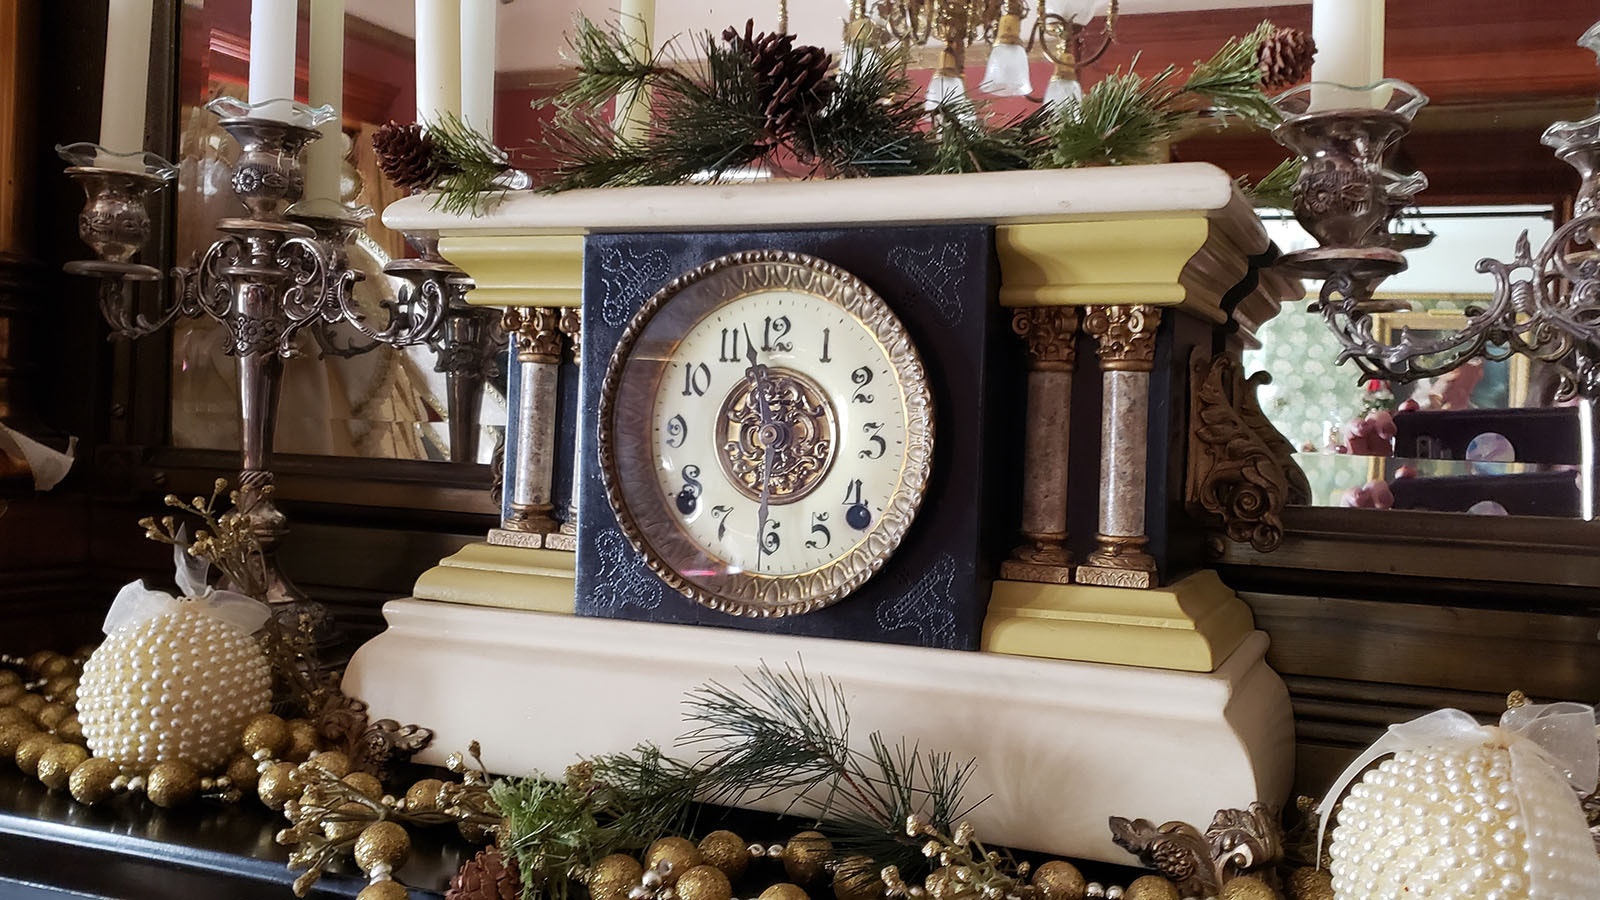 This clock is original to the Nagle-Warren Mansion. Two-star Michelin chef Jas Barbé has been actively seeking to find items that used to be in the mansion that were auctioned off to save the exterior in the 1970s.